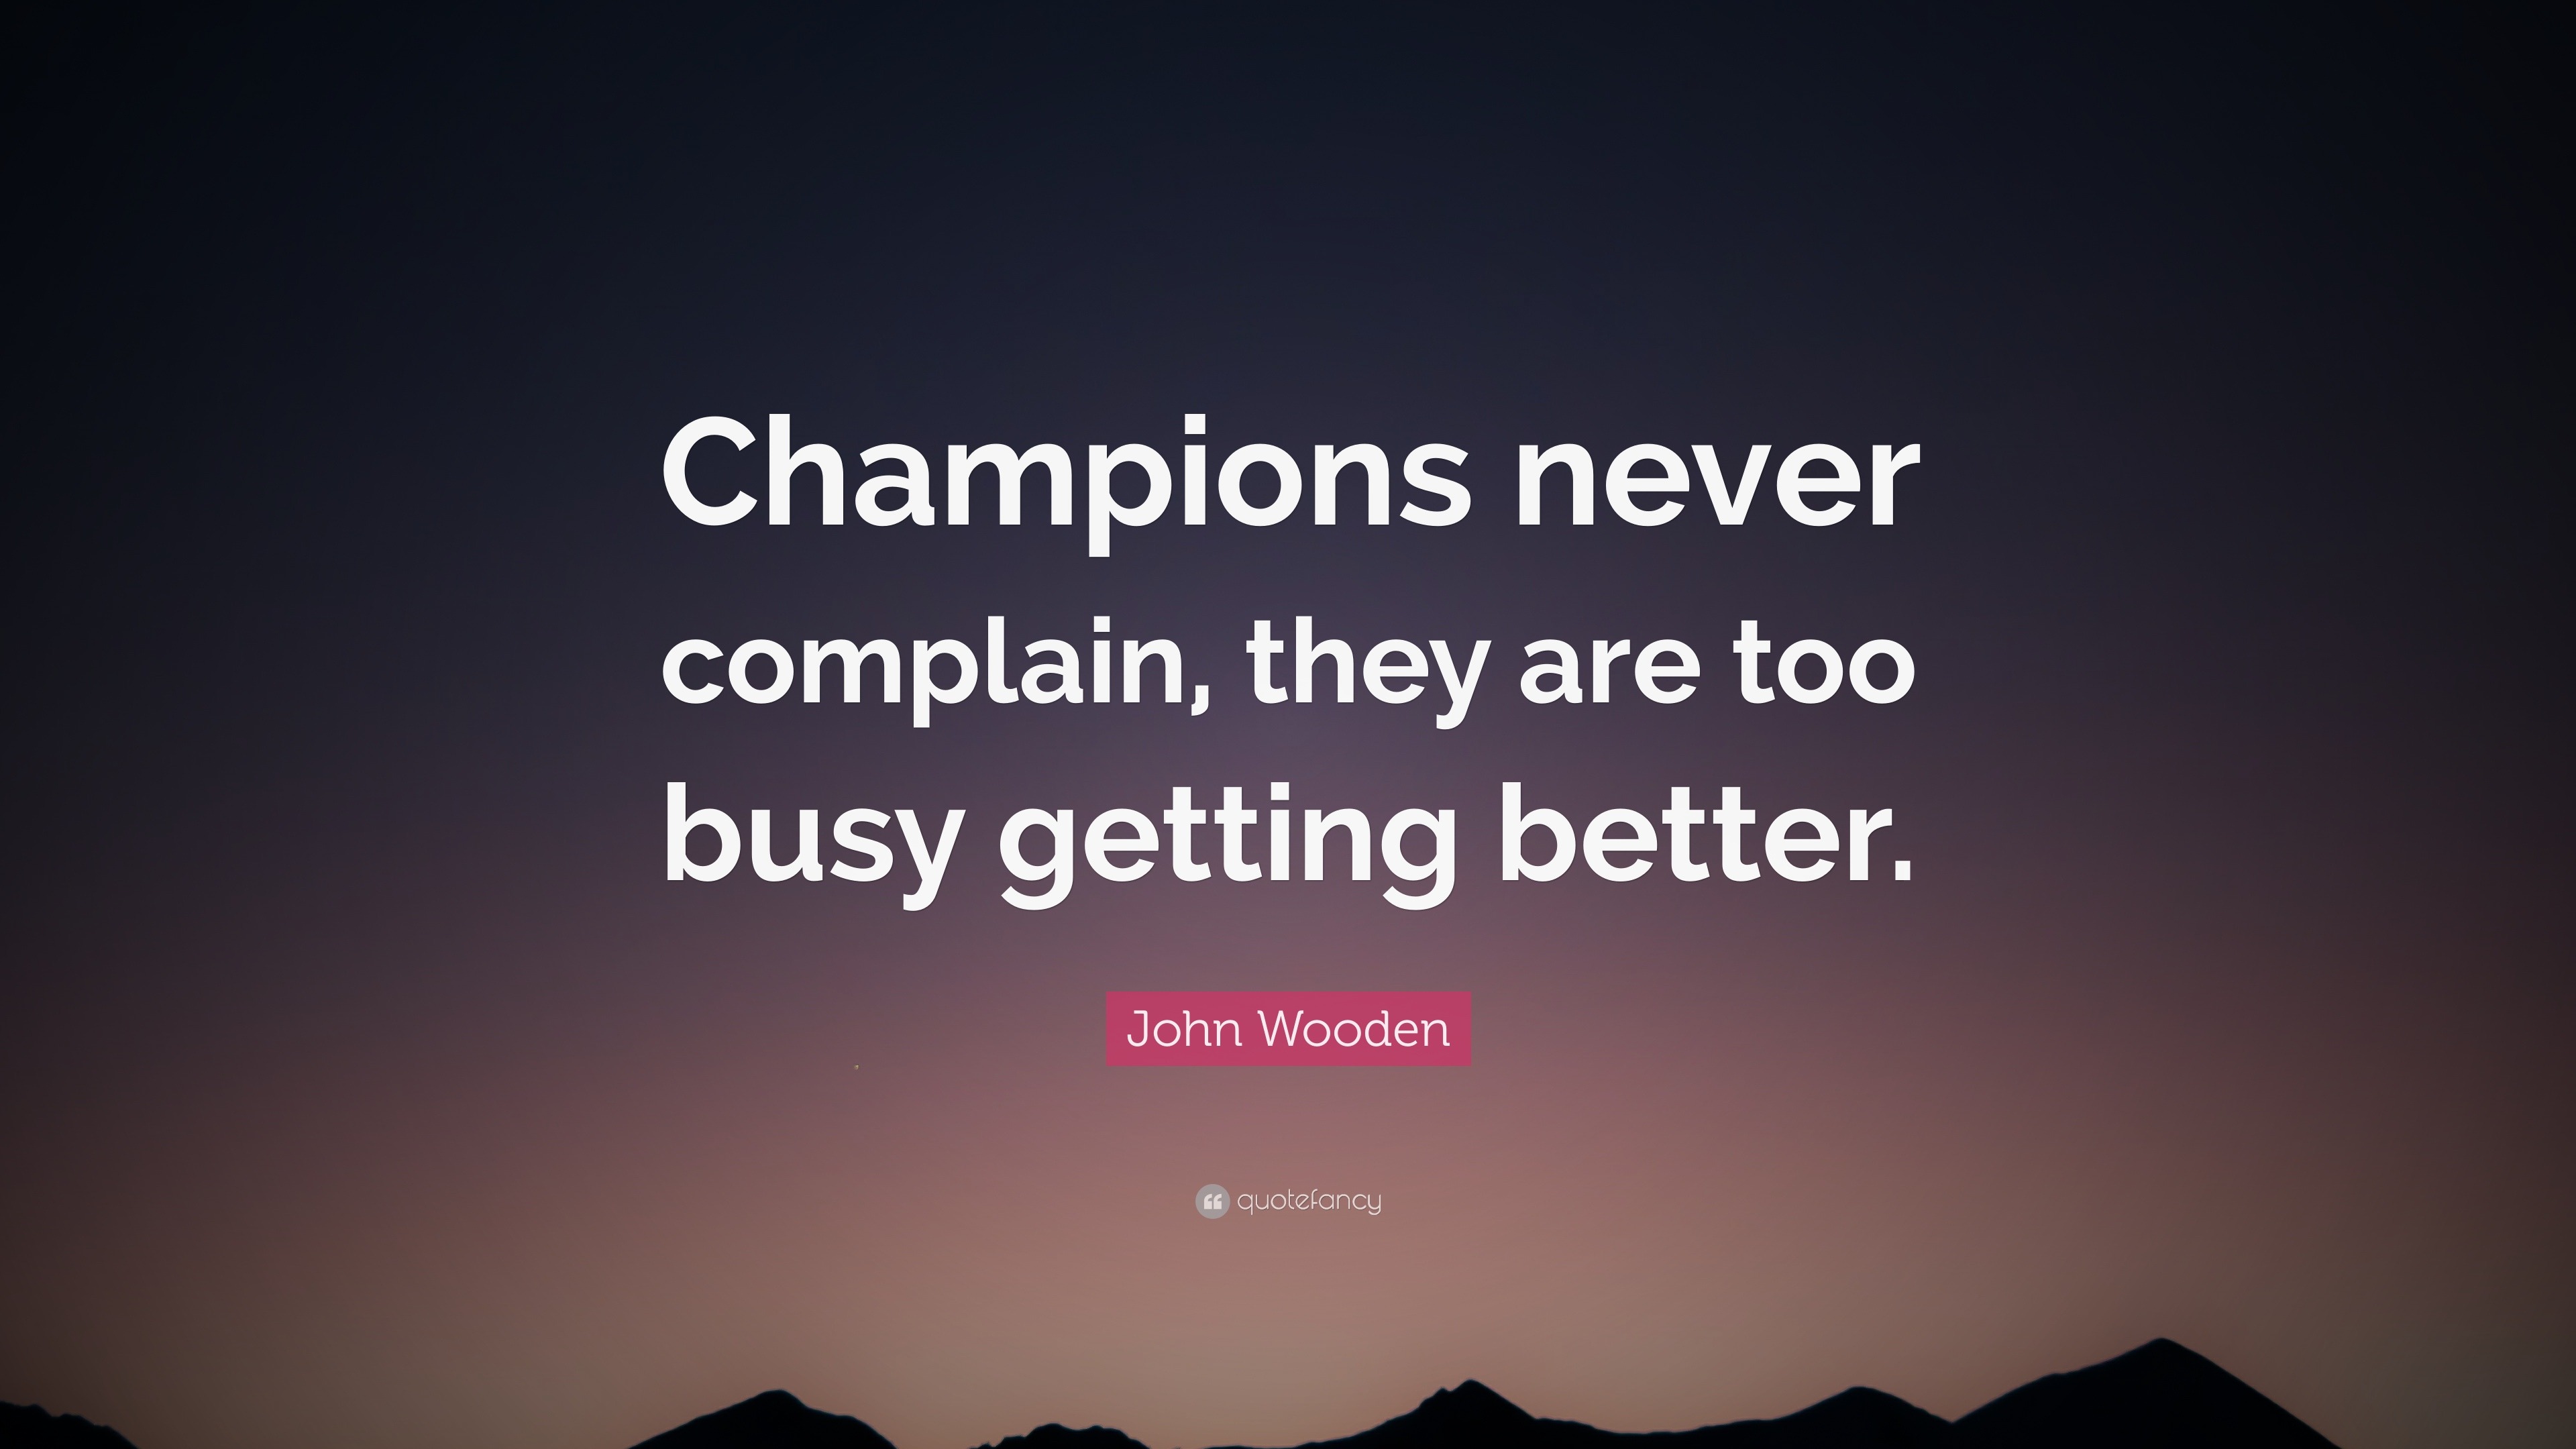 Champions Qoutes / Champions Quotes A Champion Is Defined Not By Their